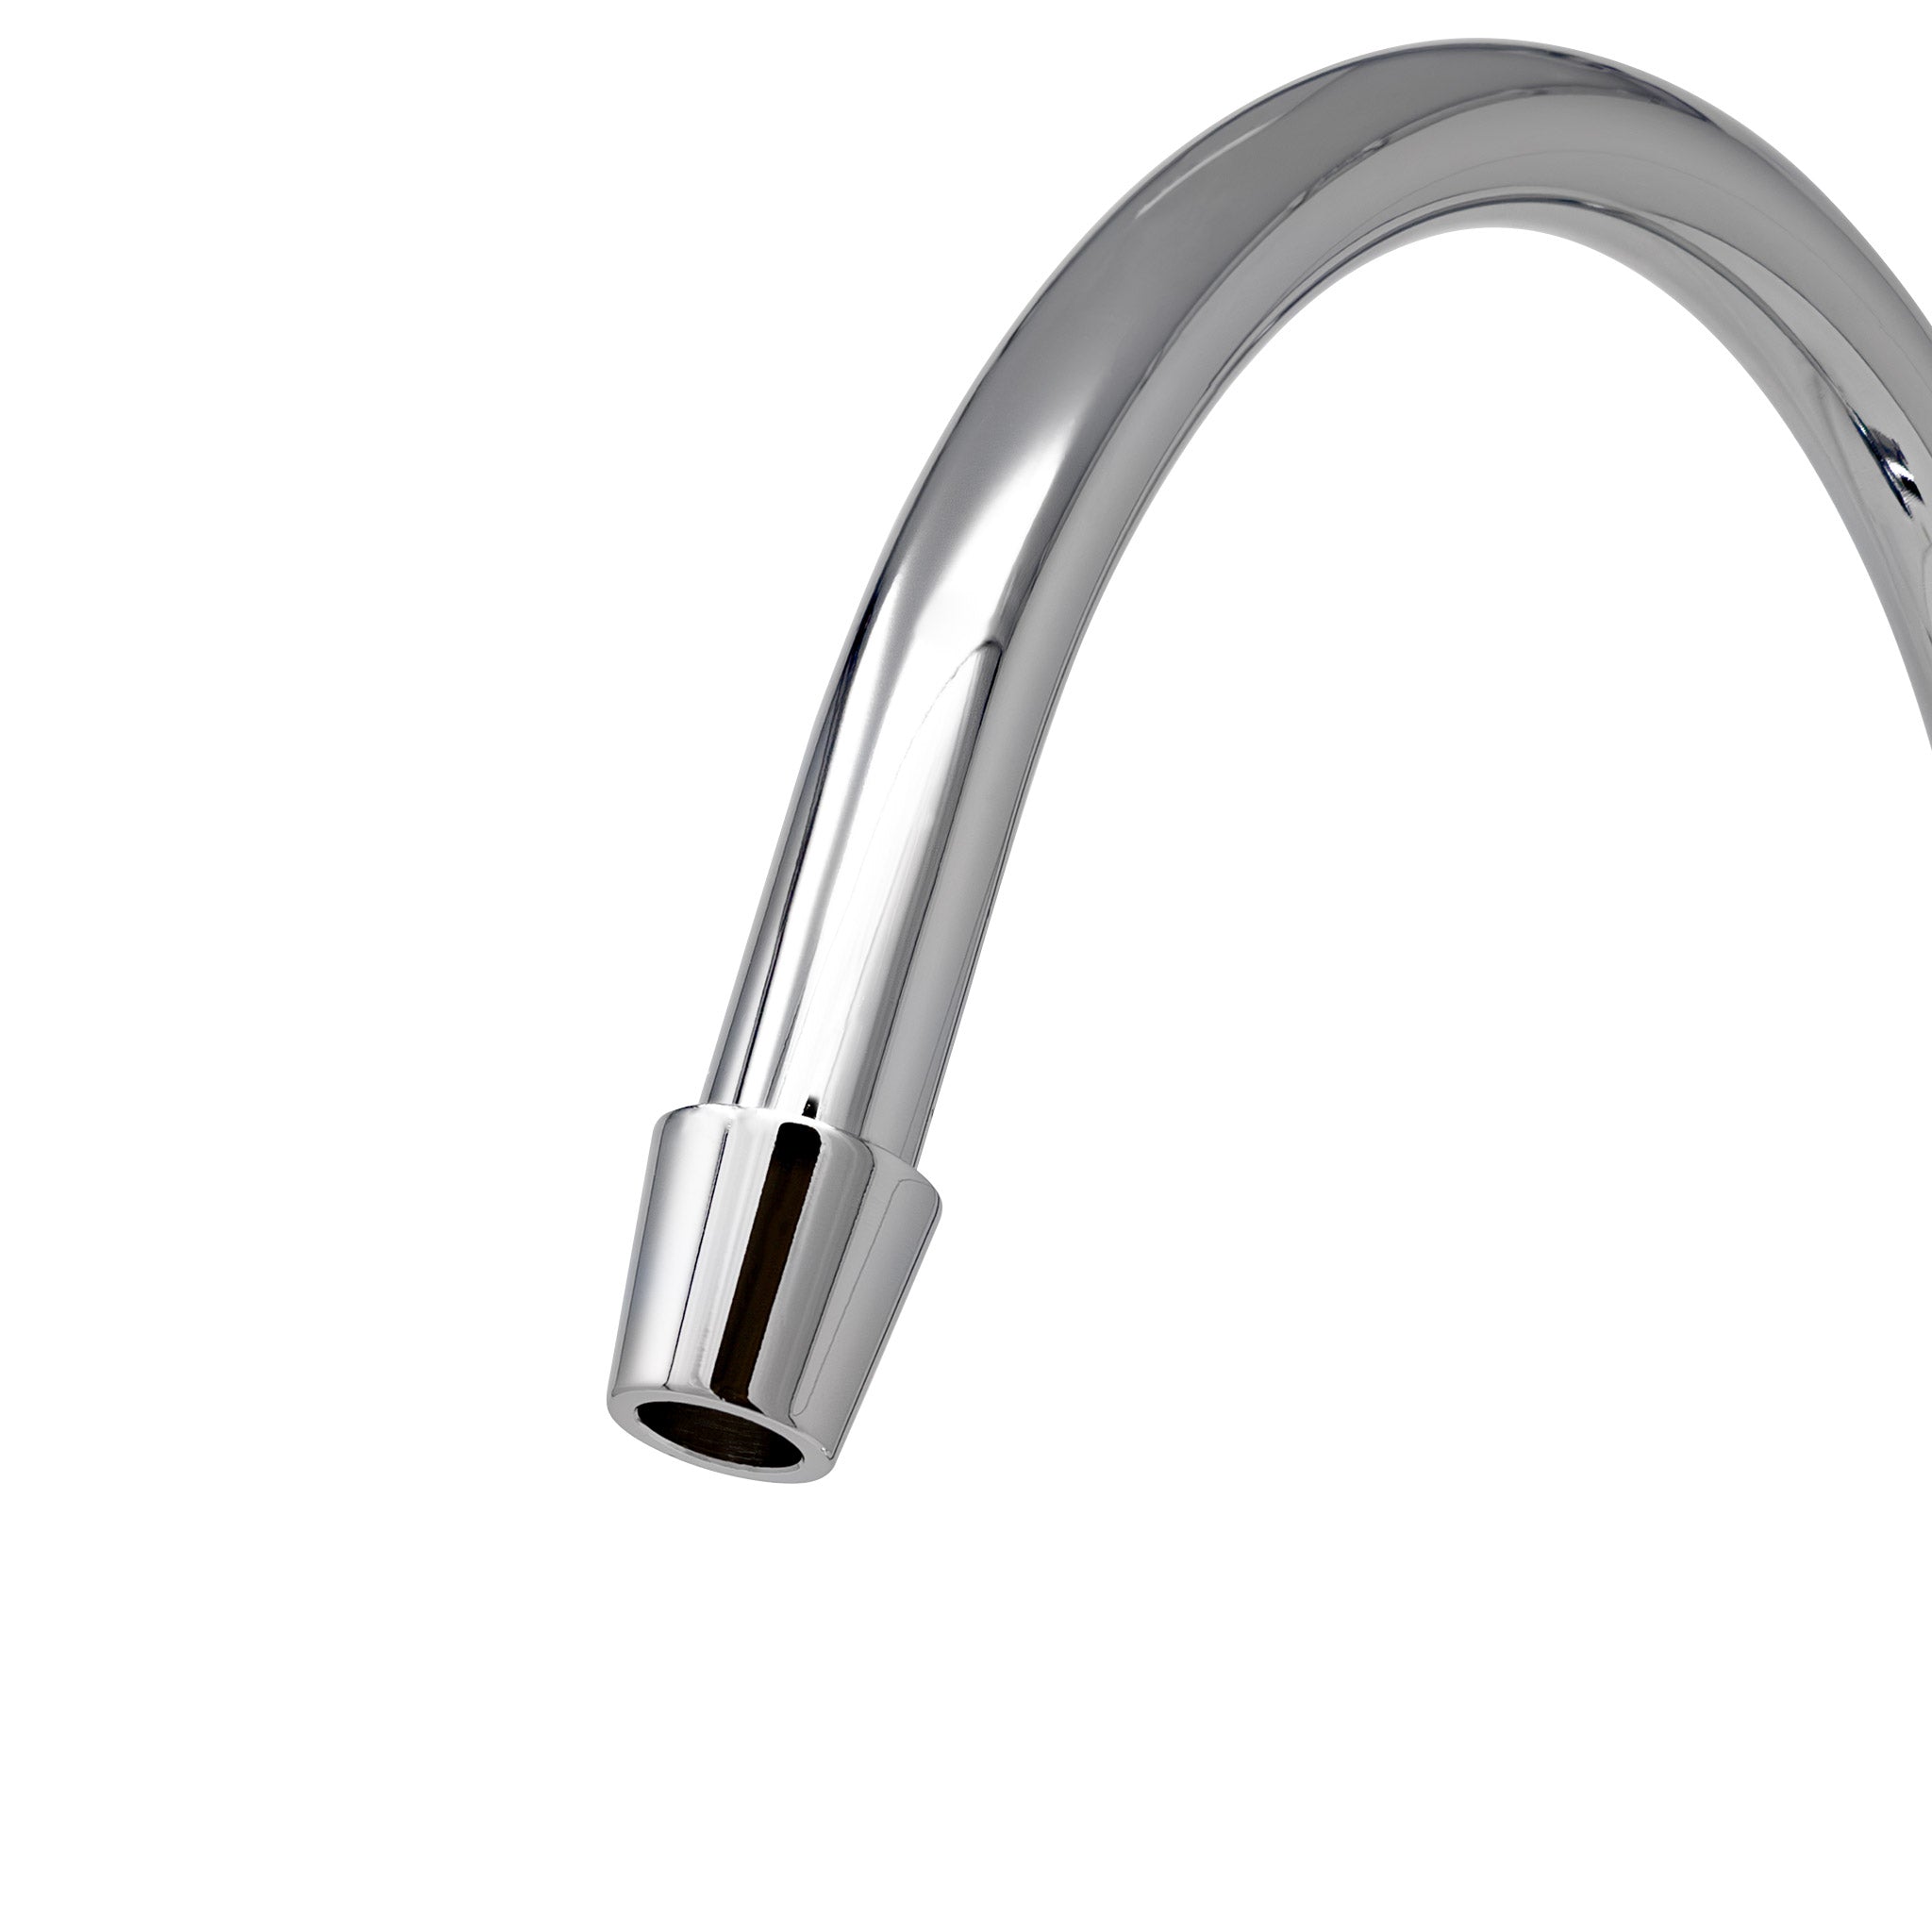 Water Filtration Faucet Chrome Euro Style Reverse Osmosis Non Air Gap. Certified by NSF.